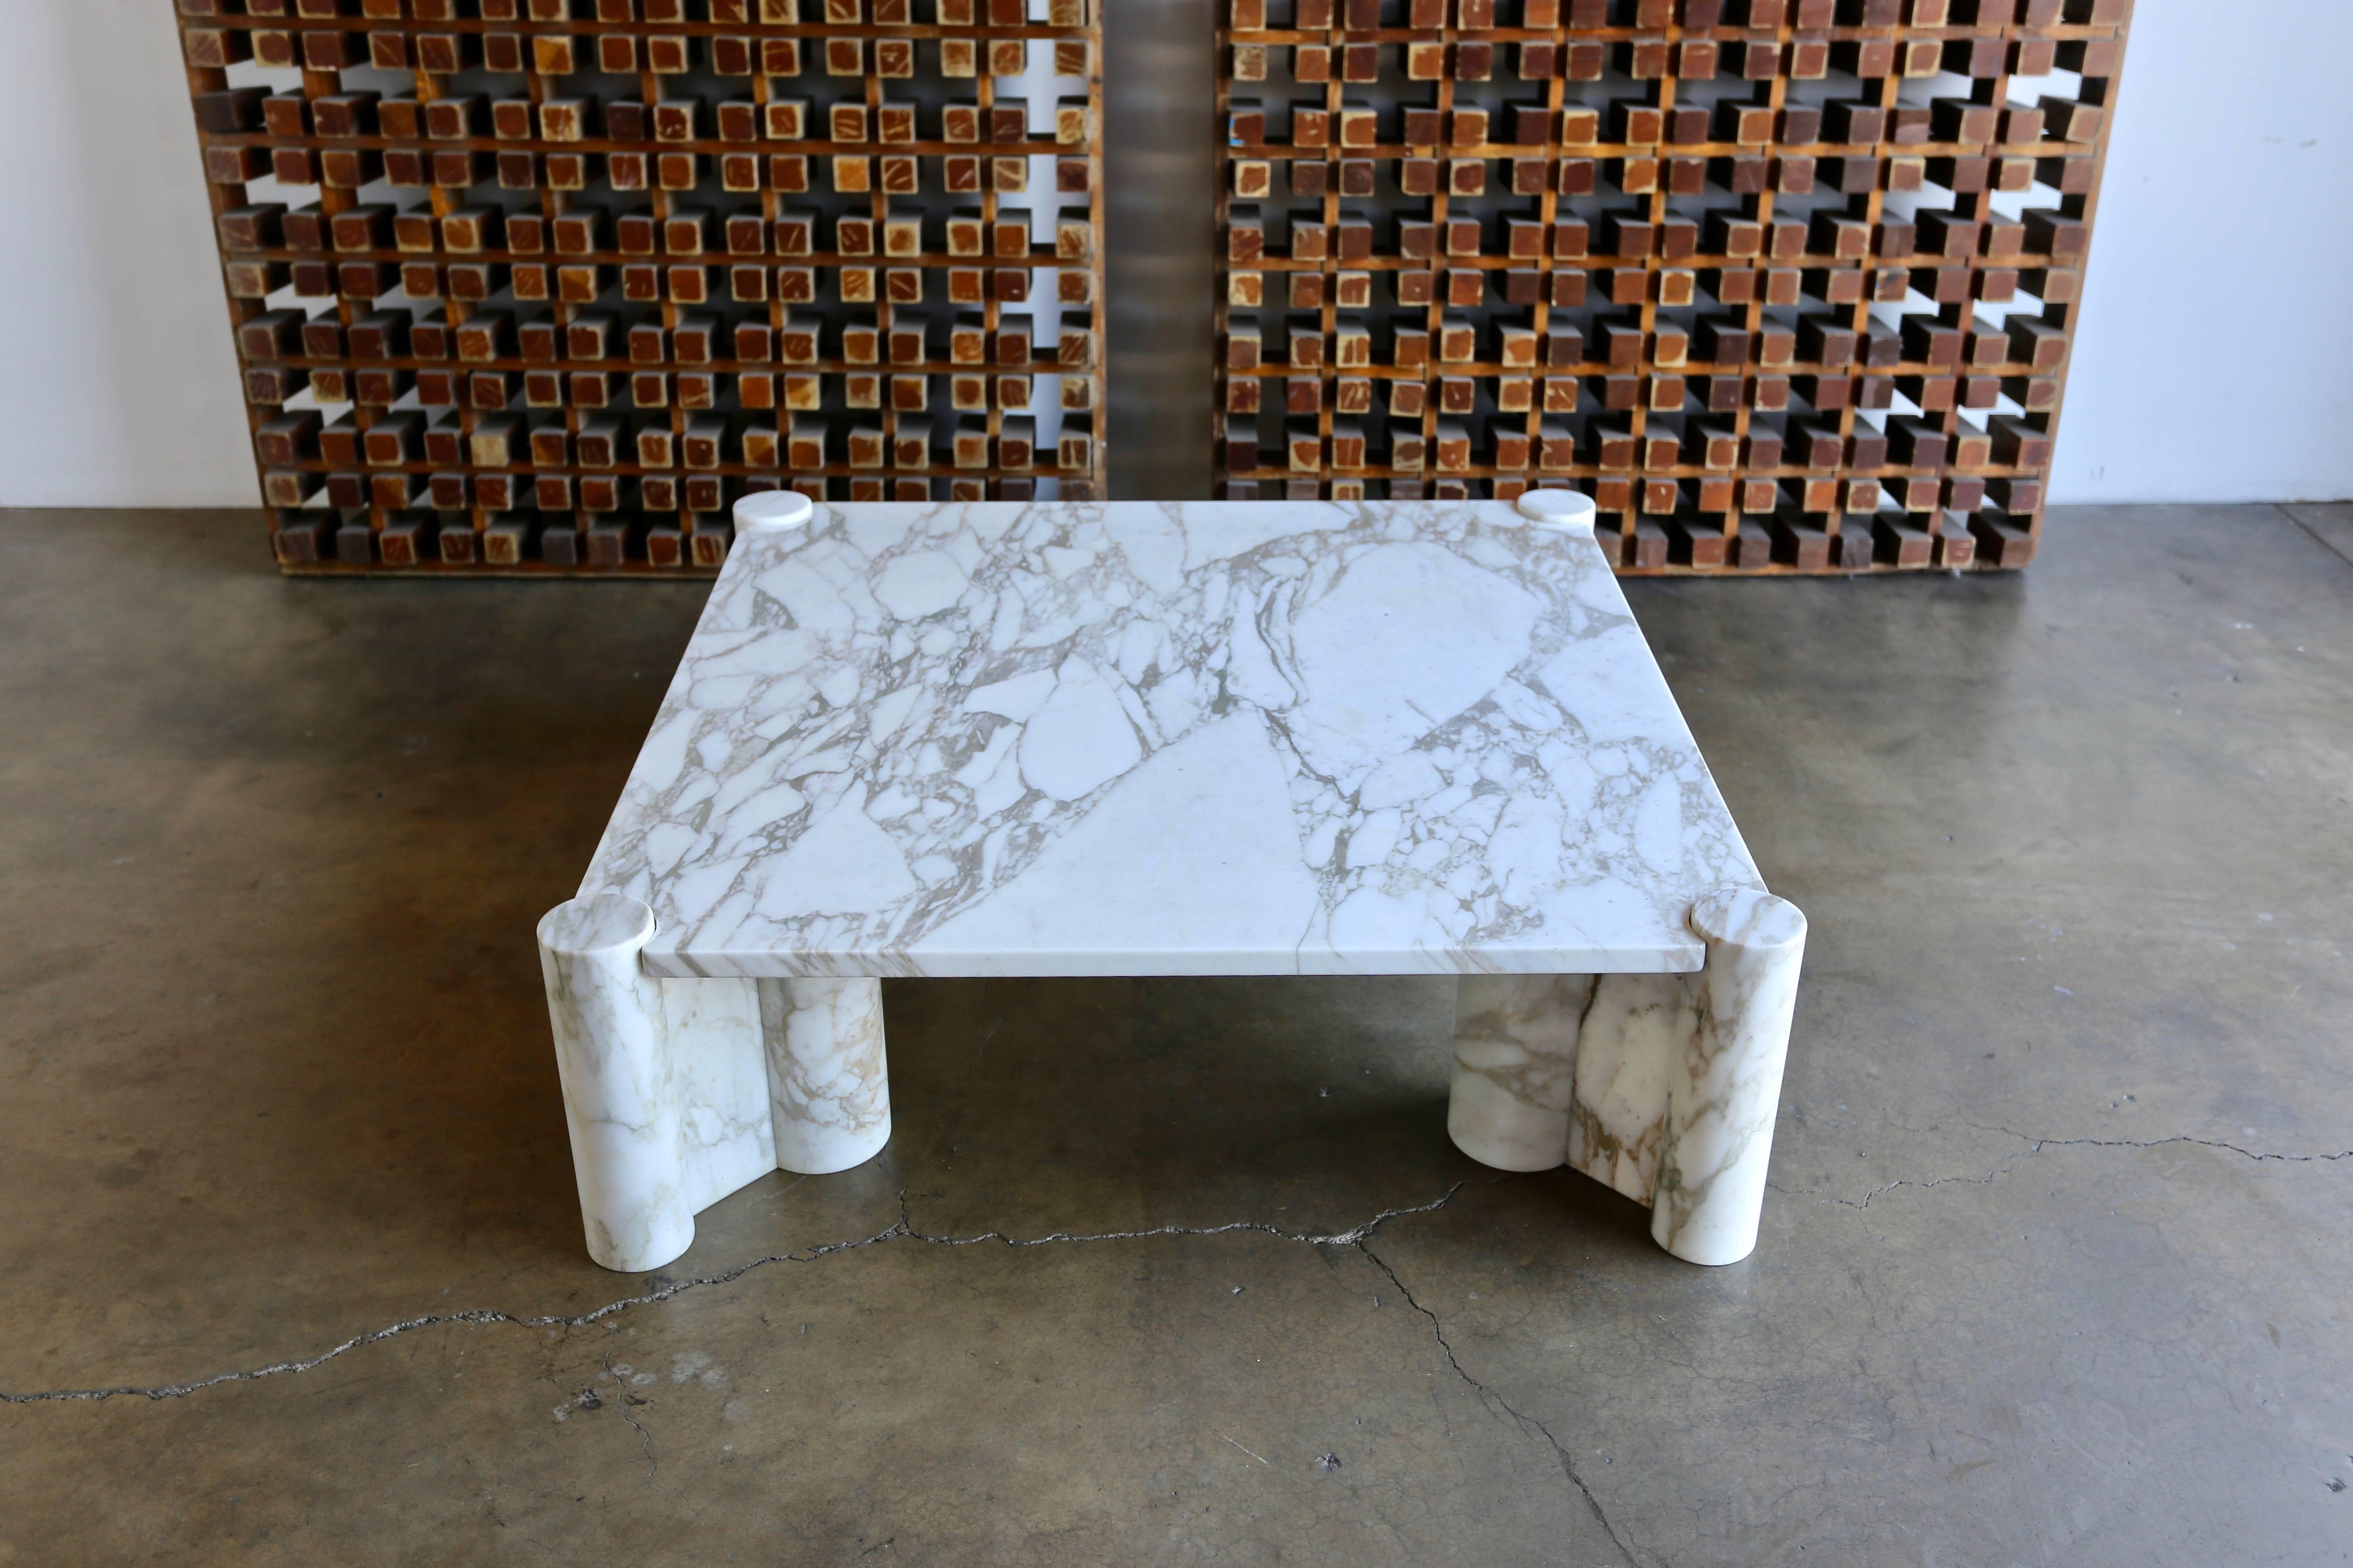 Gae Aulenti Calacatta marble jumbo table. Cylindrical marble legs with dynamic veining. Manufactured by Knoll, circa 1970.